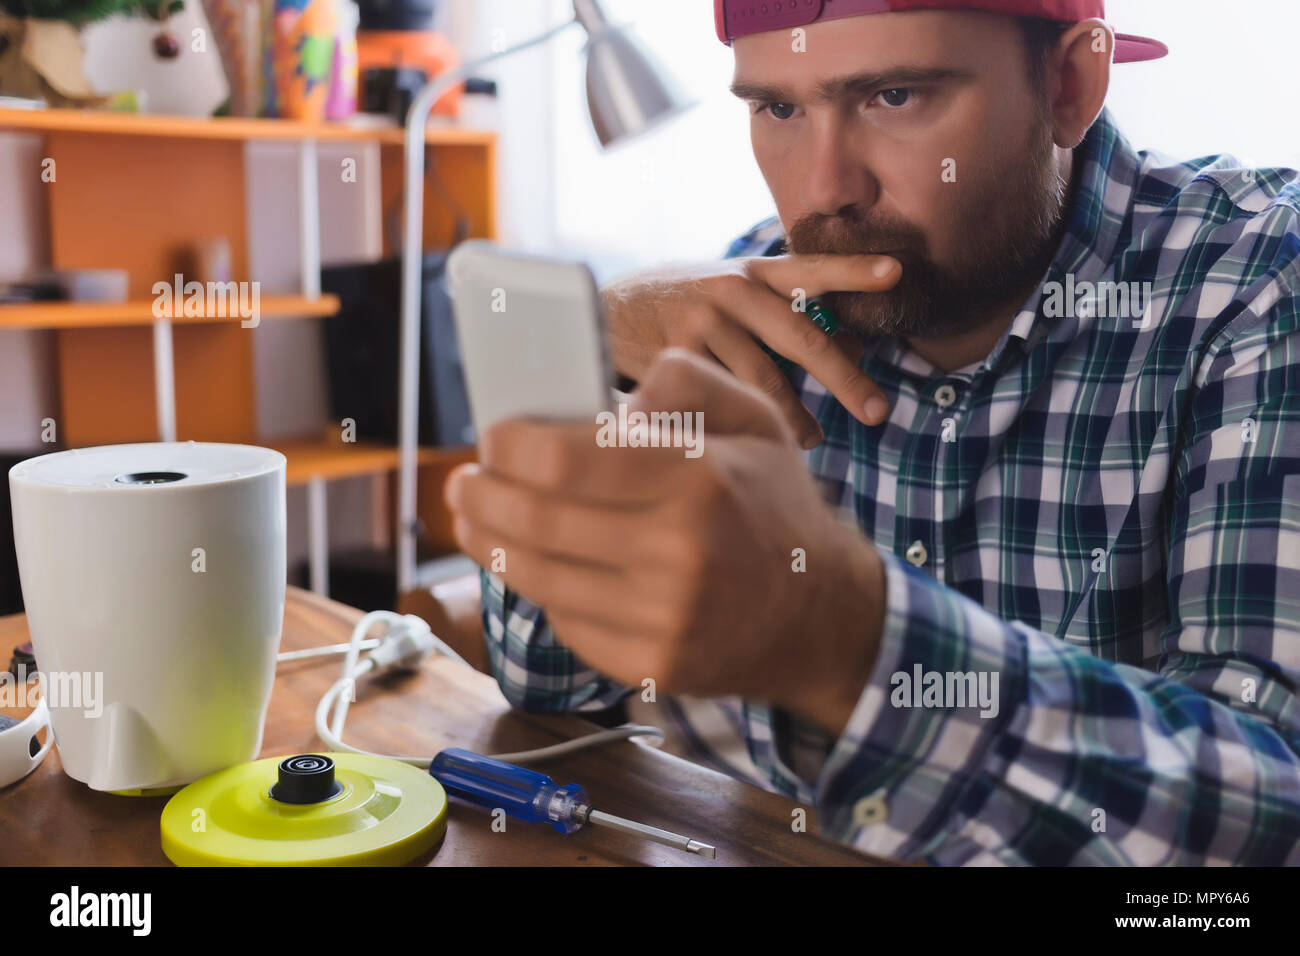 Serious man using smart phone at home Stock Photo